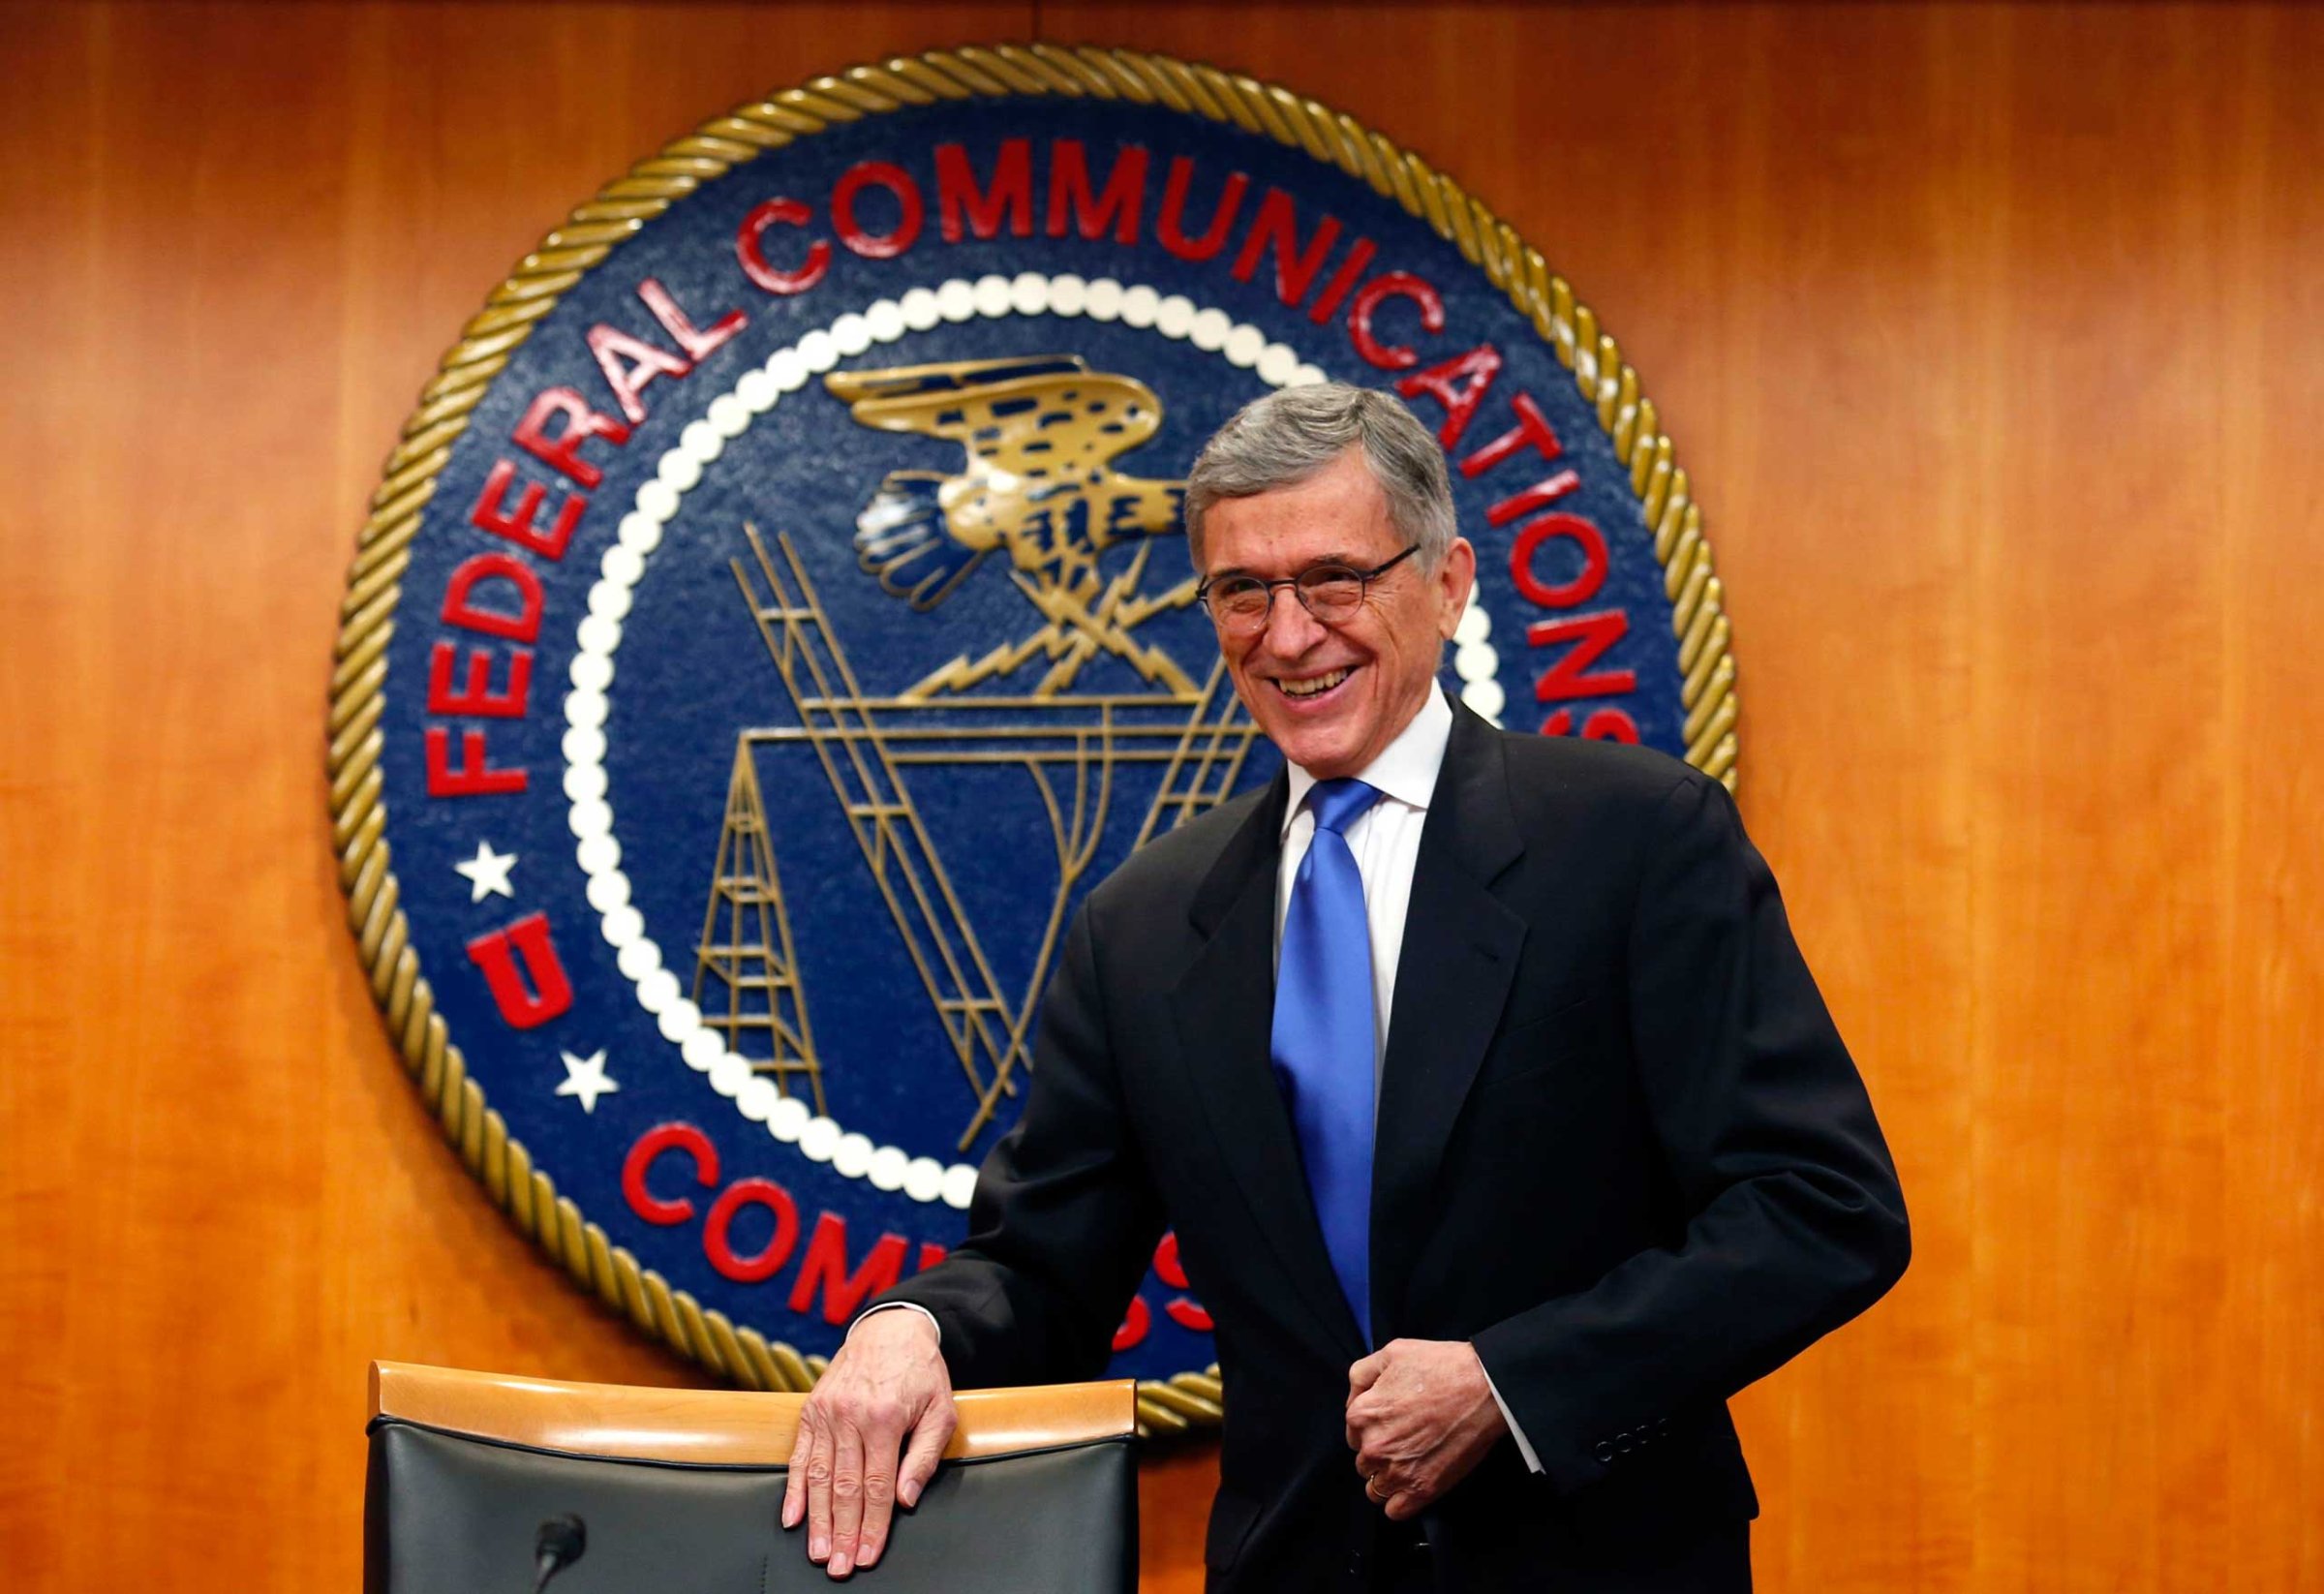 Federal Communications Commission (FCC) Chairman Tom Wheeler arrives at FCC Net Neutrality hearing in Washington